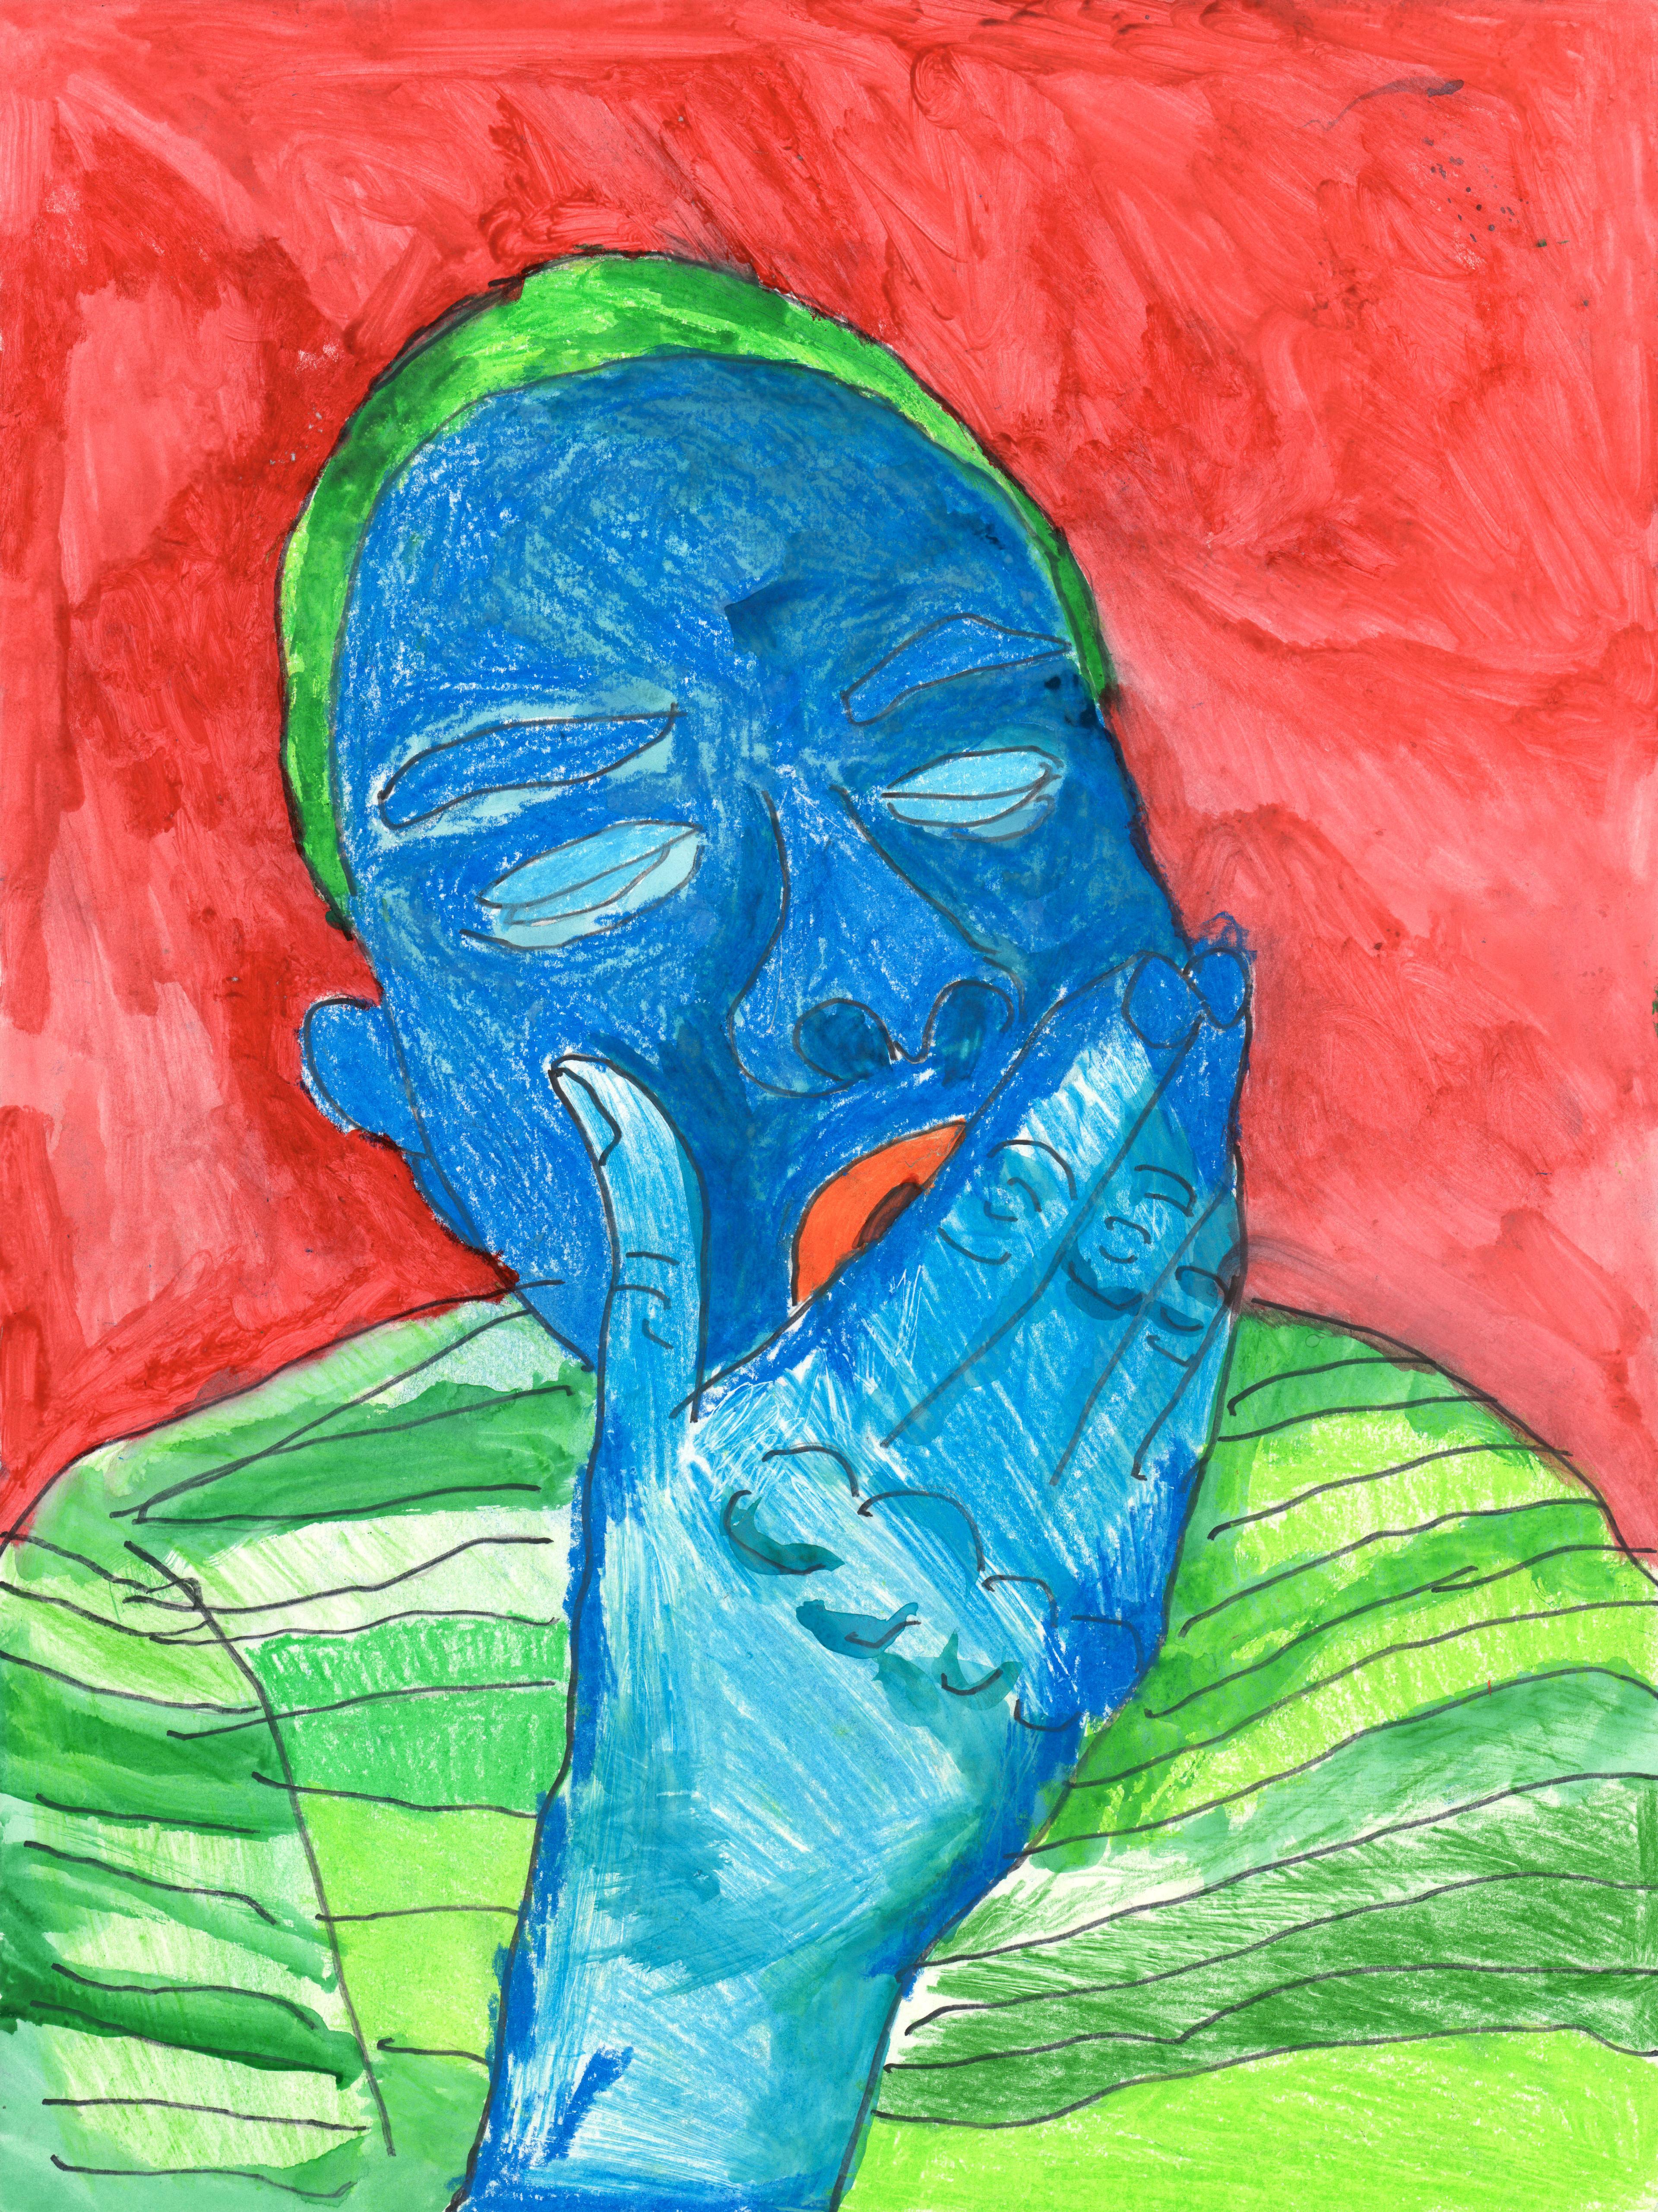 Self-portrait of an adolescent boy with blue skin, short green hair, and a green shirt with horizontal stripes created with colored pencil, oil pastel, and watercolor. The boy is yawning and covering his open red mouth with his right hand. His eyes are closed, and the background is a bold red. Thin black strokes outline the subject of this painting.